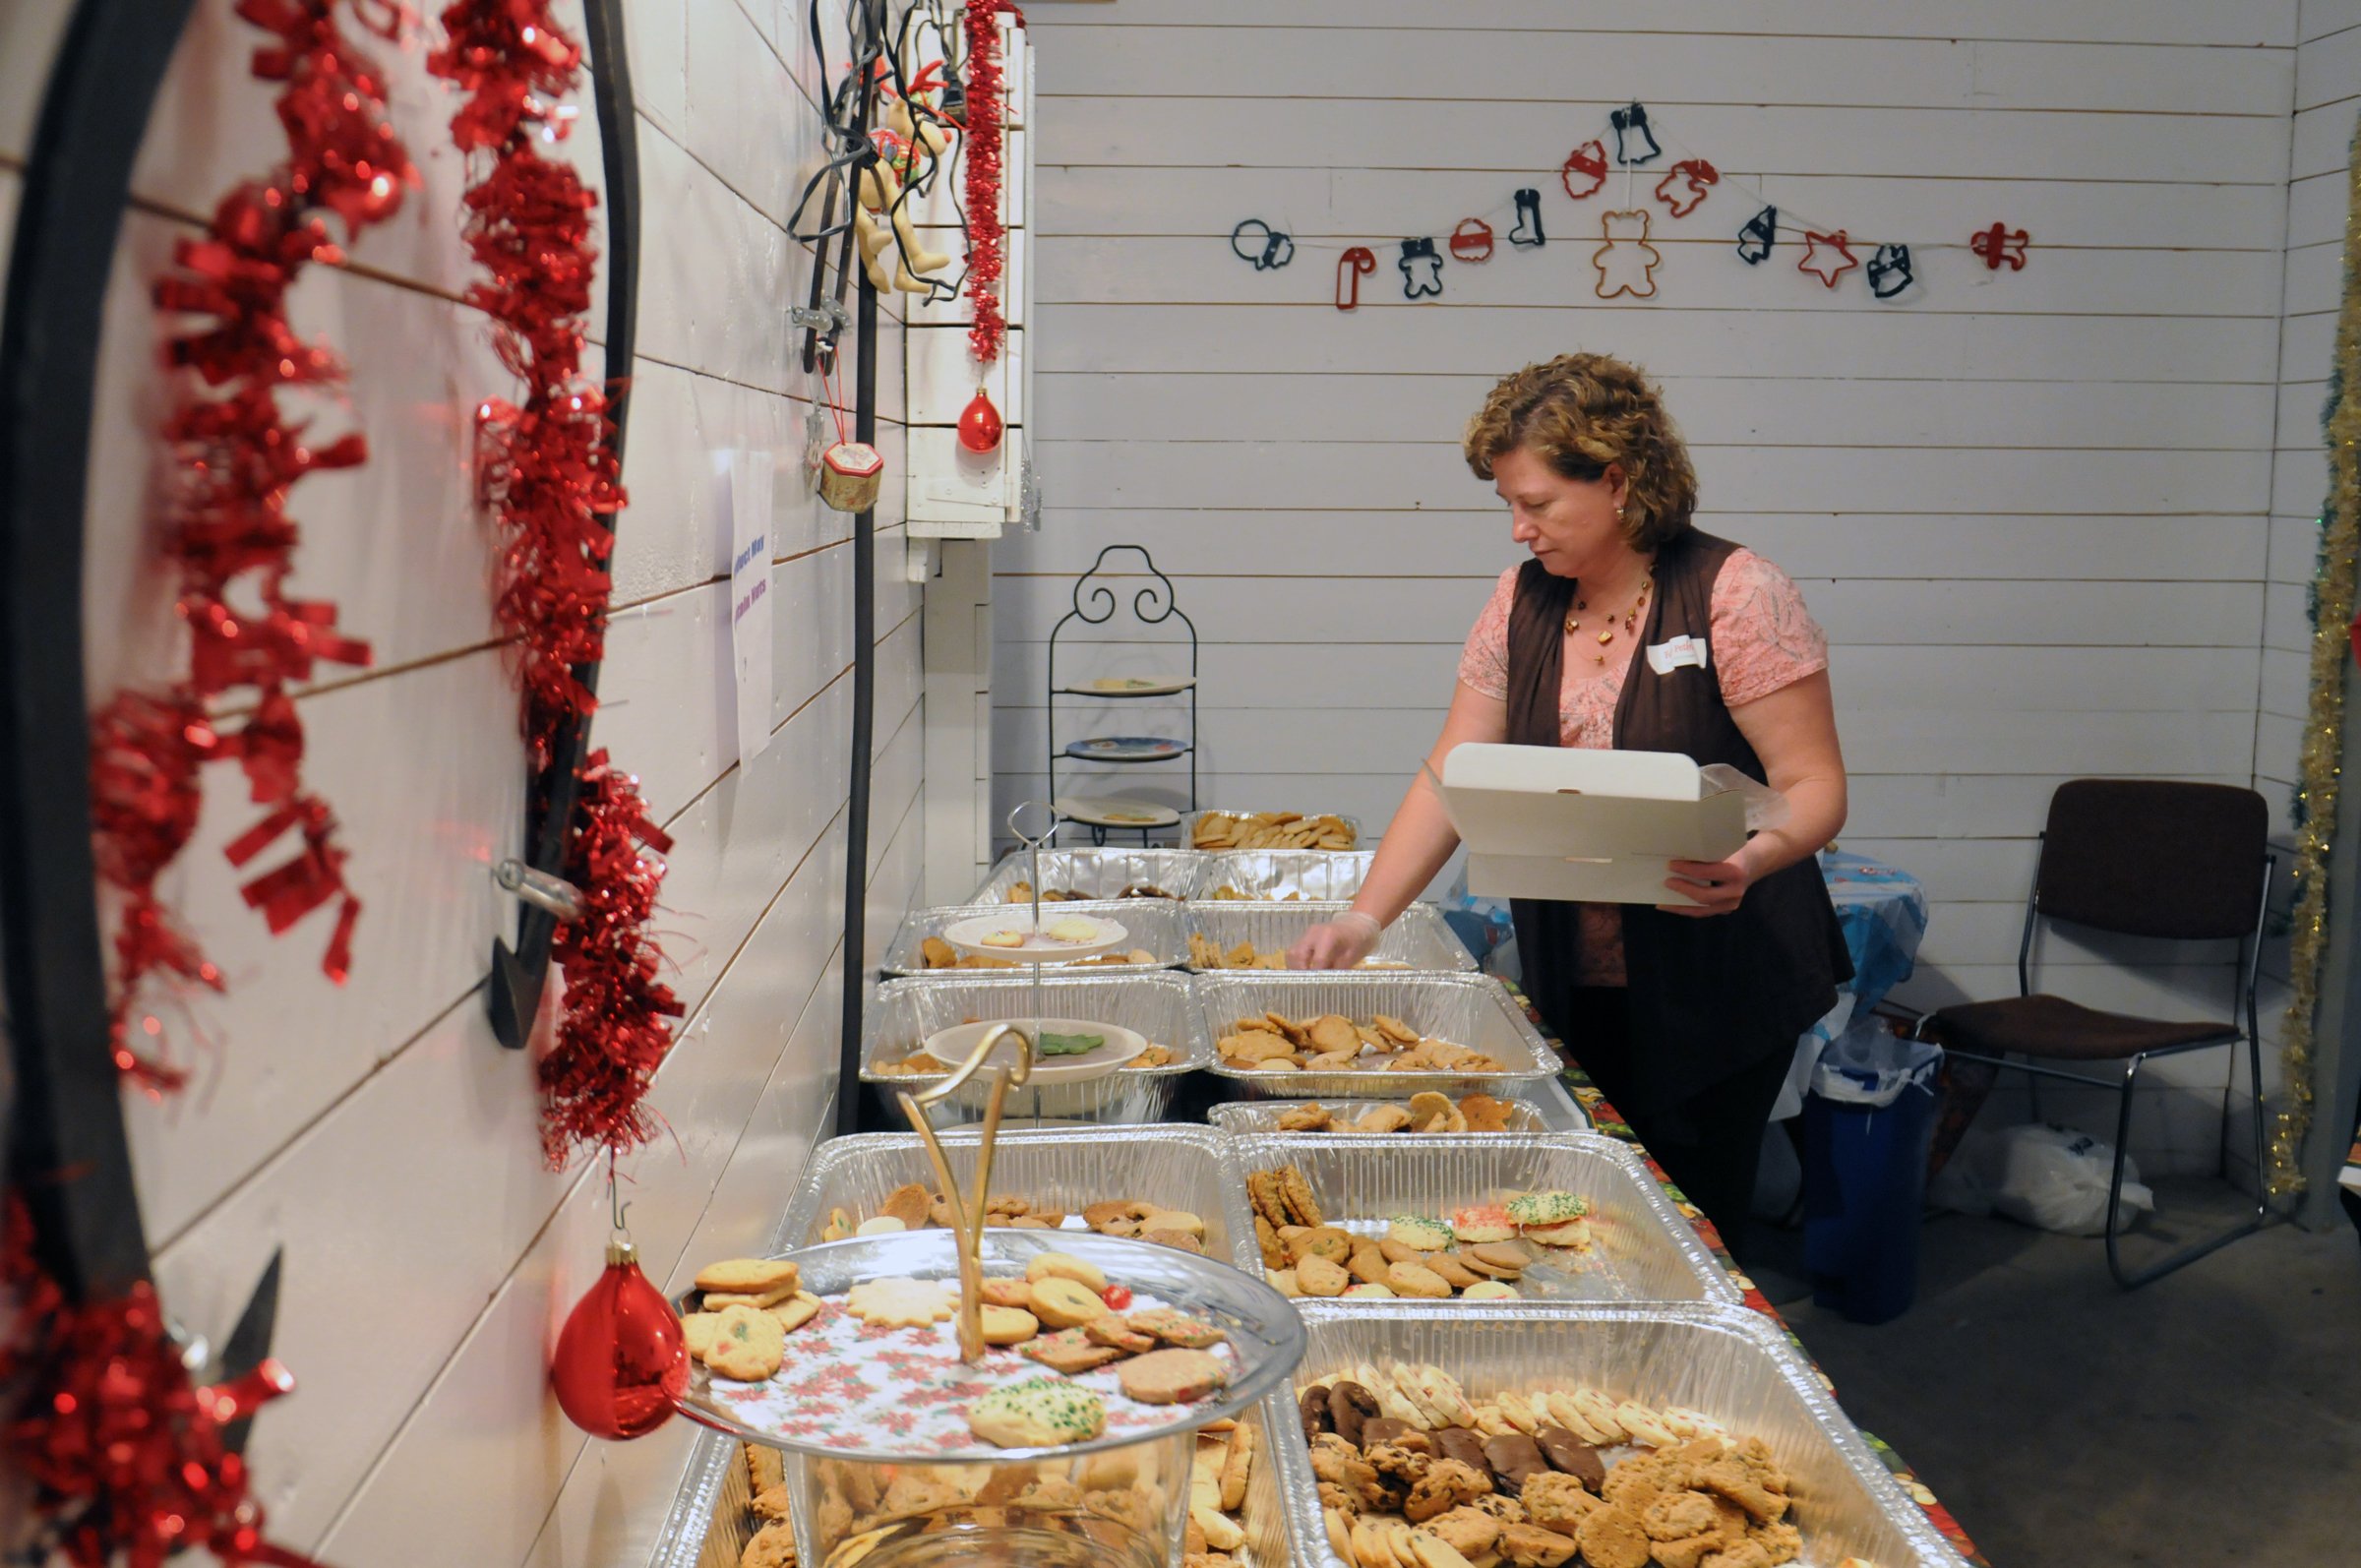 COOKIE WALK-Faye Pethick sorts out some cookies during the famous cookie walk in Markerville during their Christmas in Markerville event this past weekend.